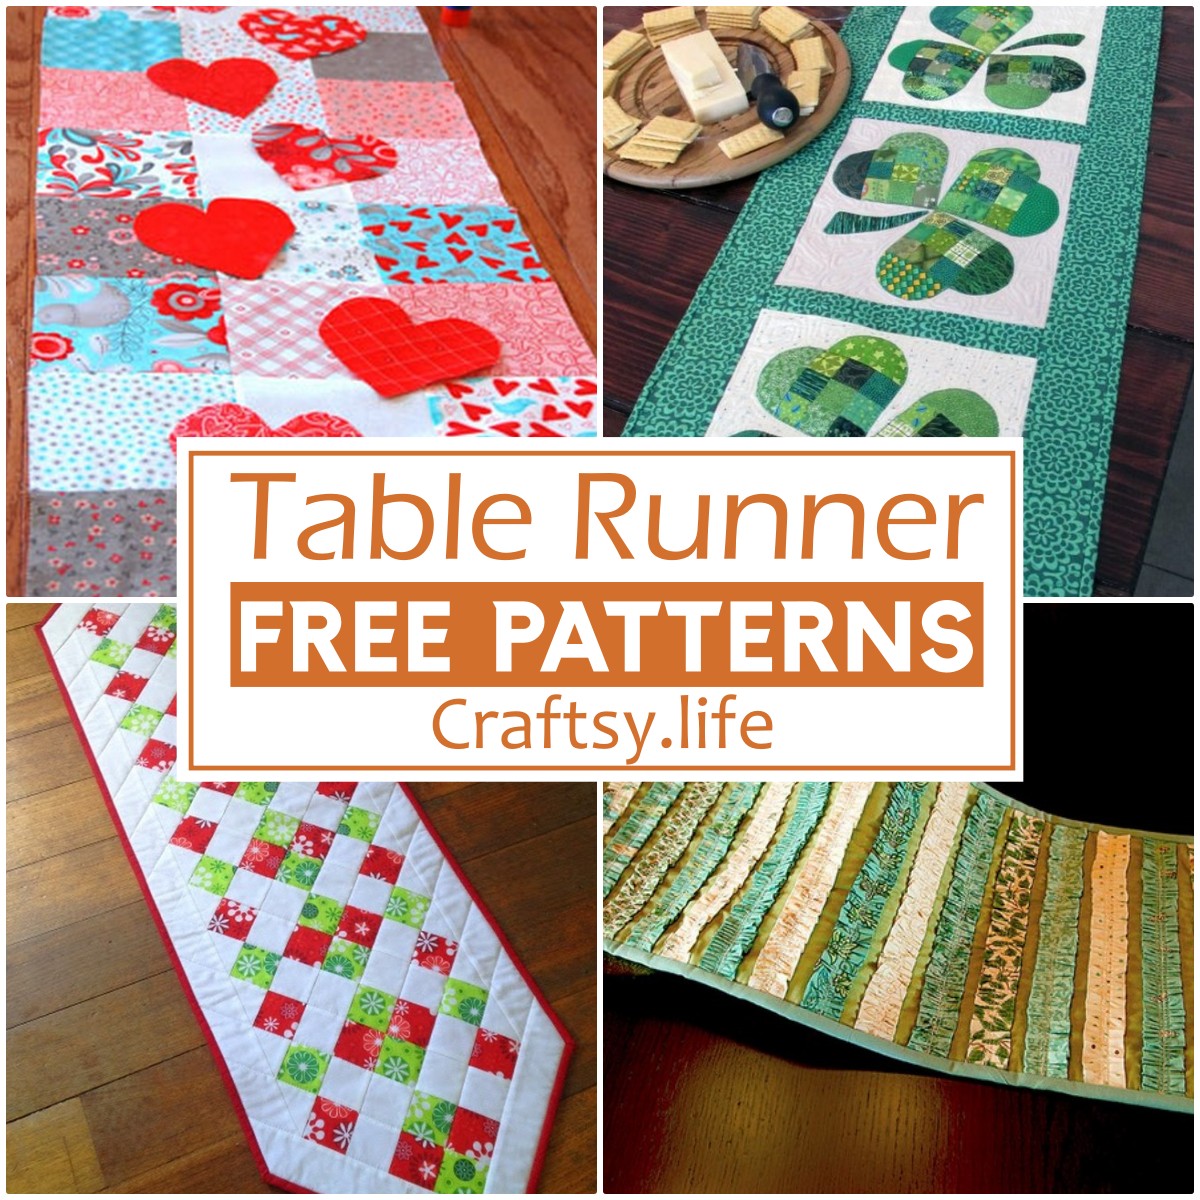 Free Table Runner Patterns